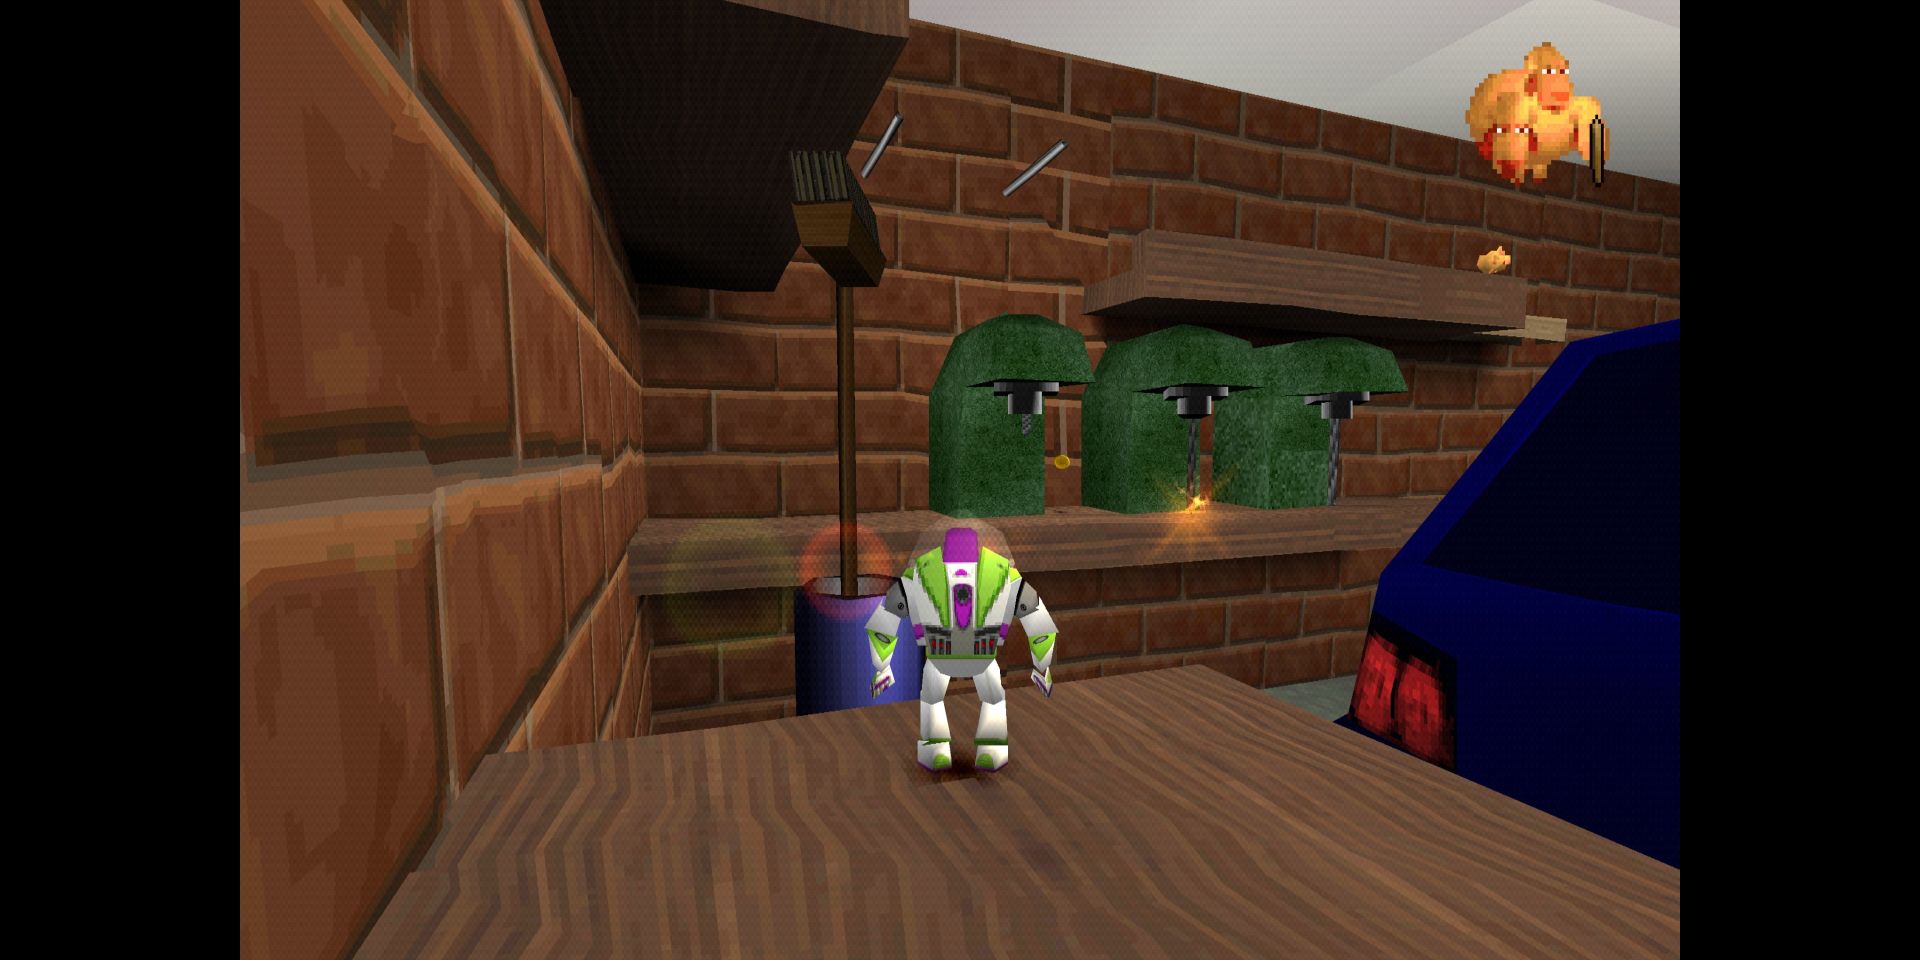 Buzz Lightyear explores the garage of Andy's house in Toy Story 2: Buzz Lightyear to the Rescue